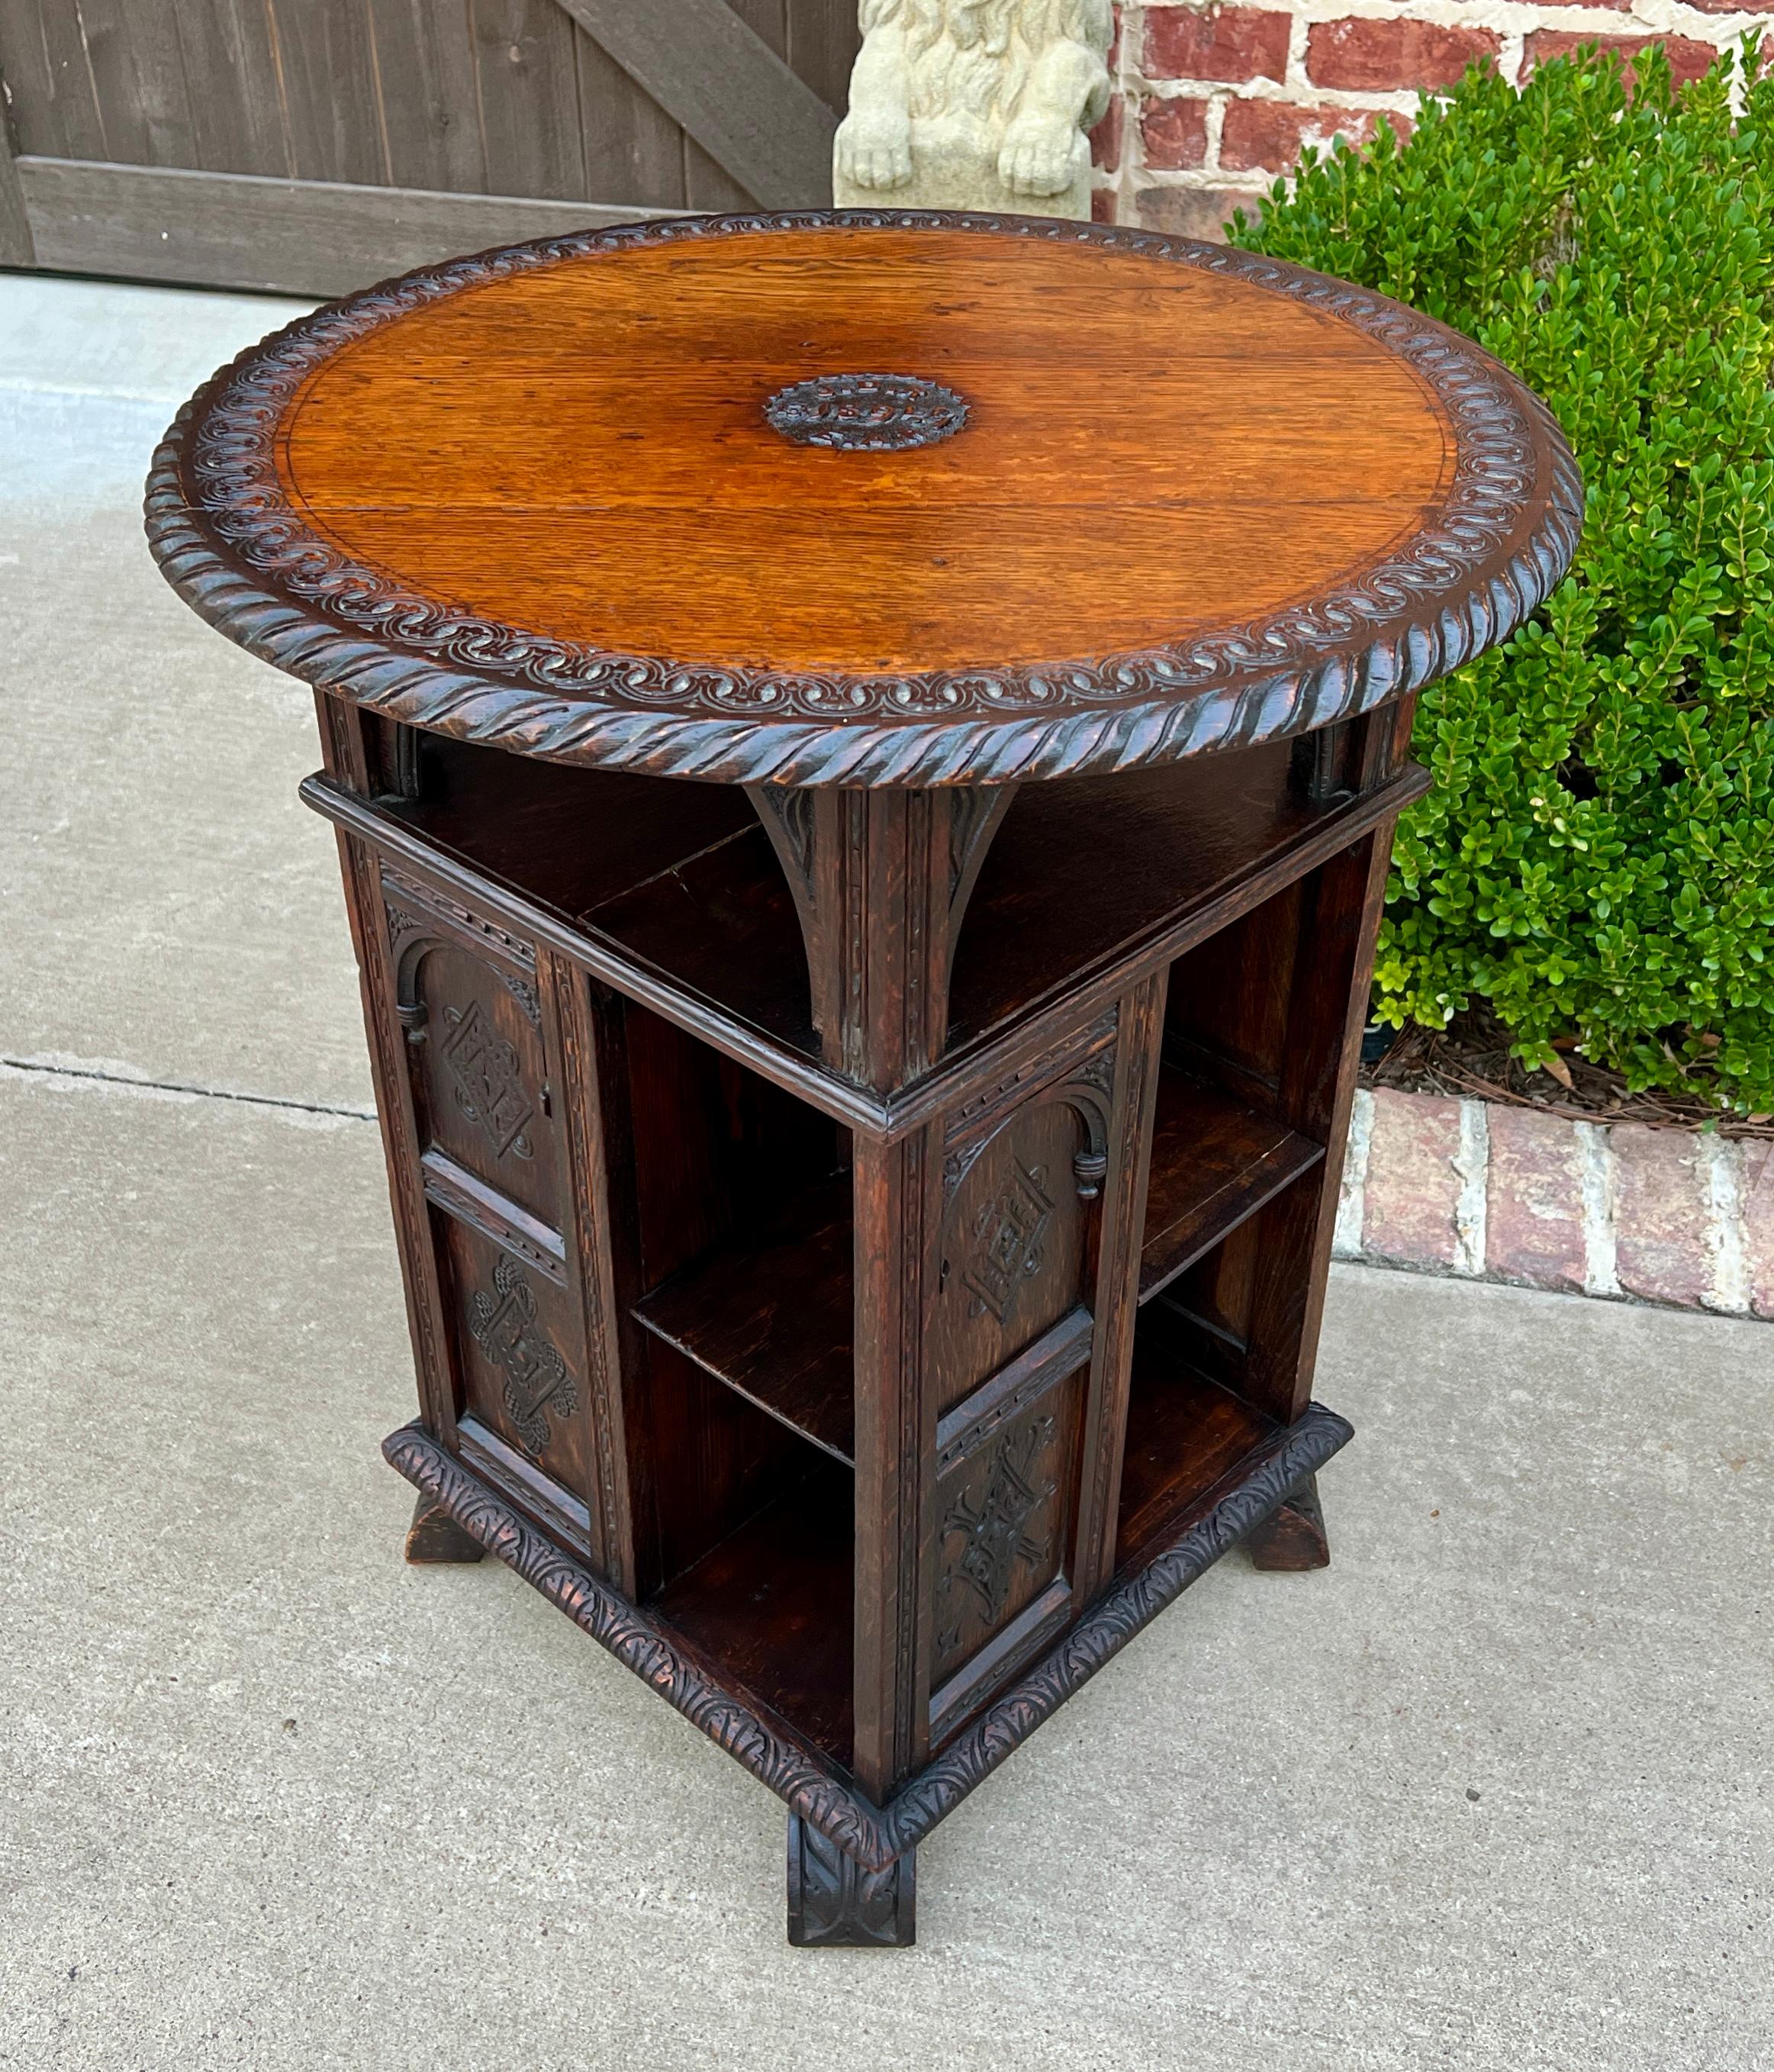 Antique English Revolving Bookcase Display Cabinet Round Table Top Oak c. 1894 6